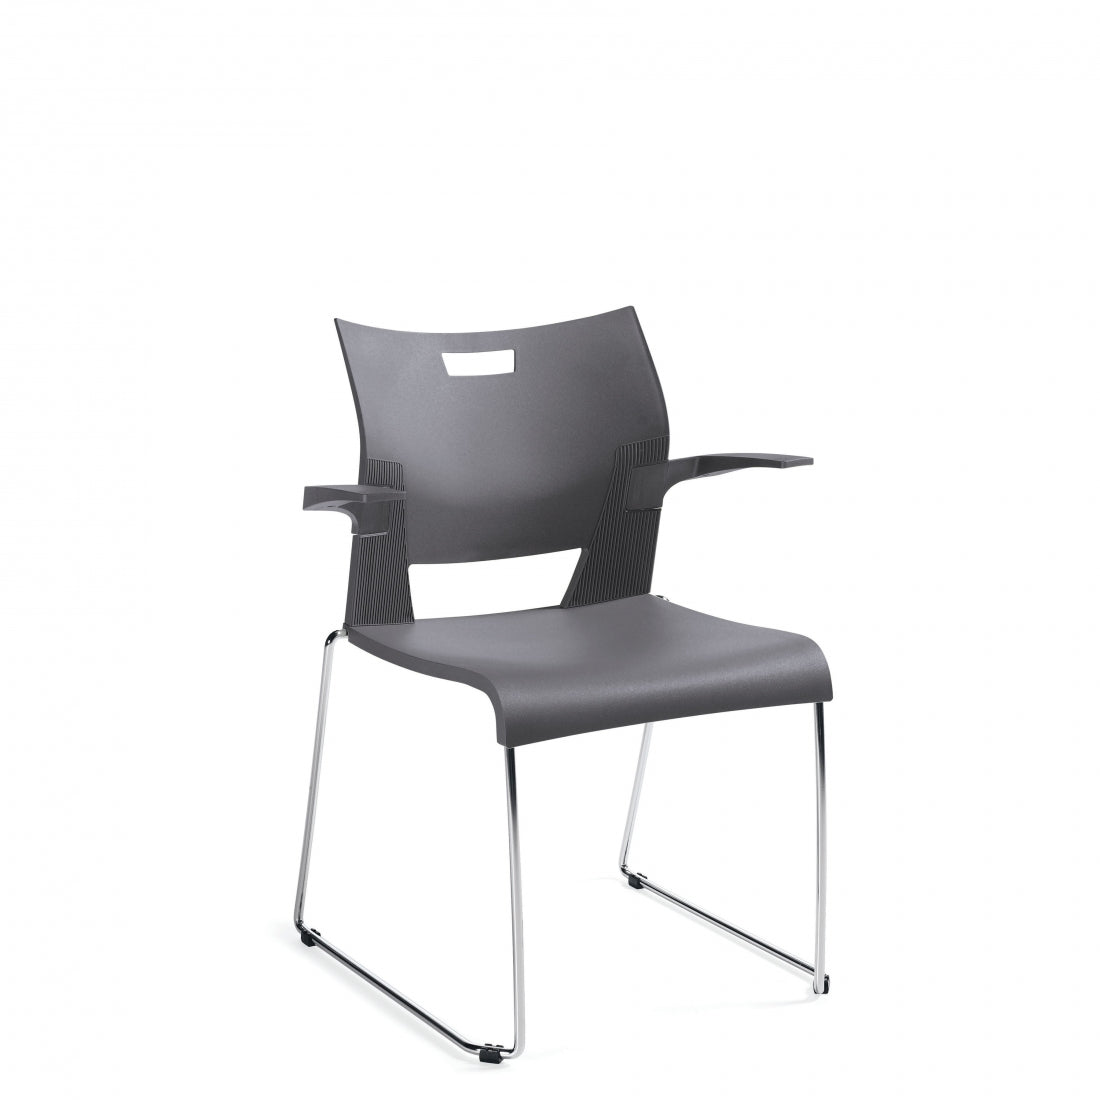 Global Duet 6620 Polypropylene Seat & Back Guest Chair, Shadow Seating-Guest Chair - Office Ready